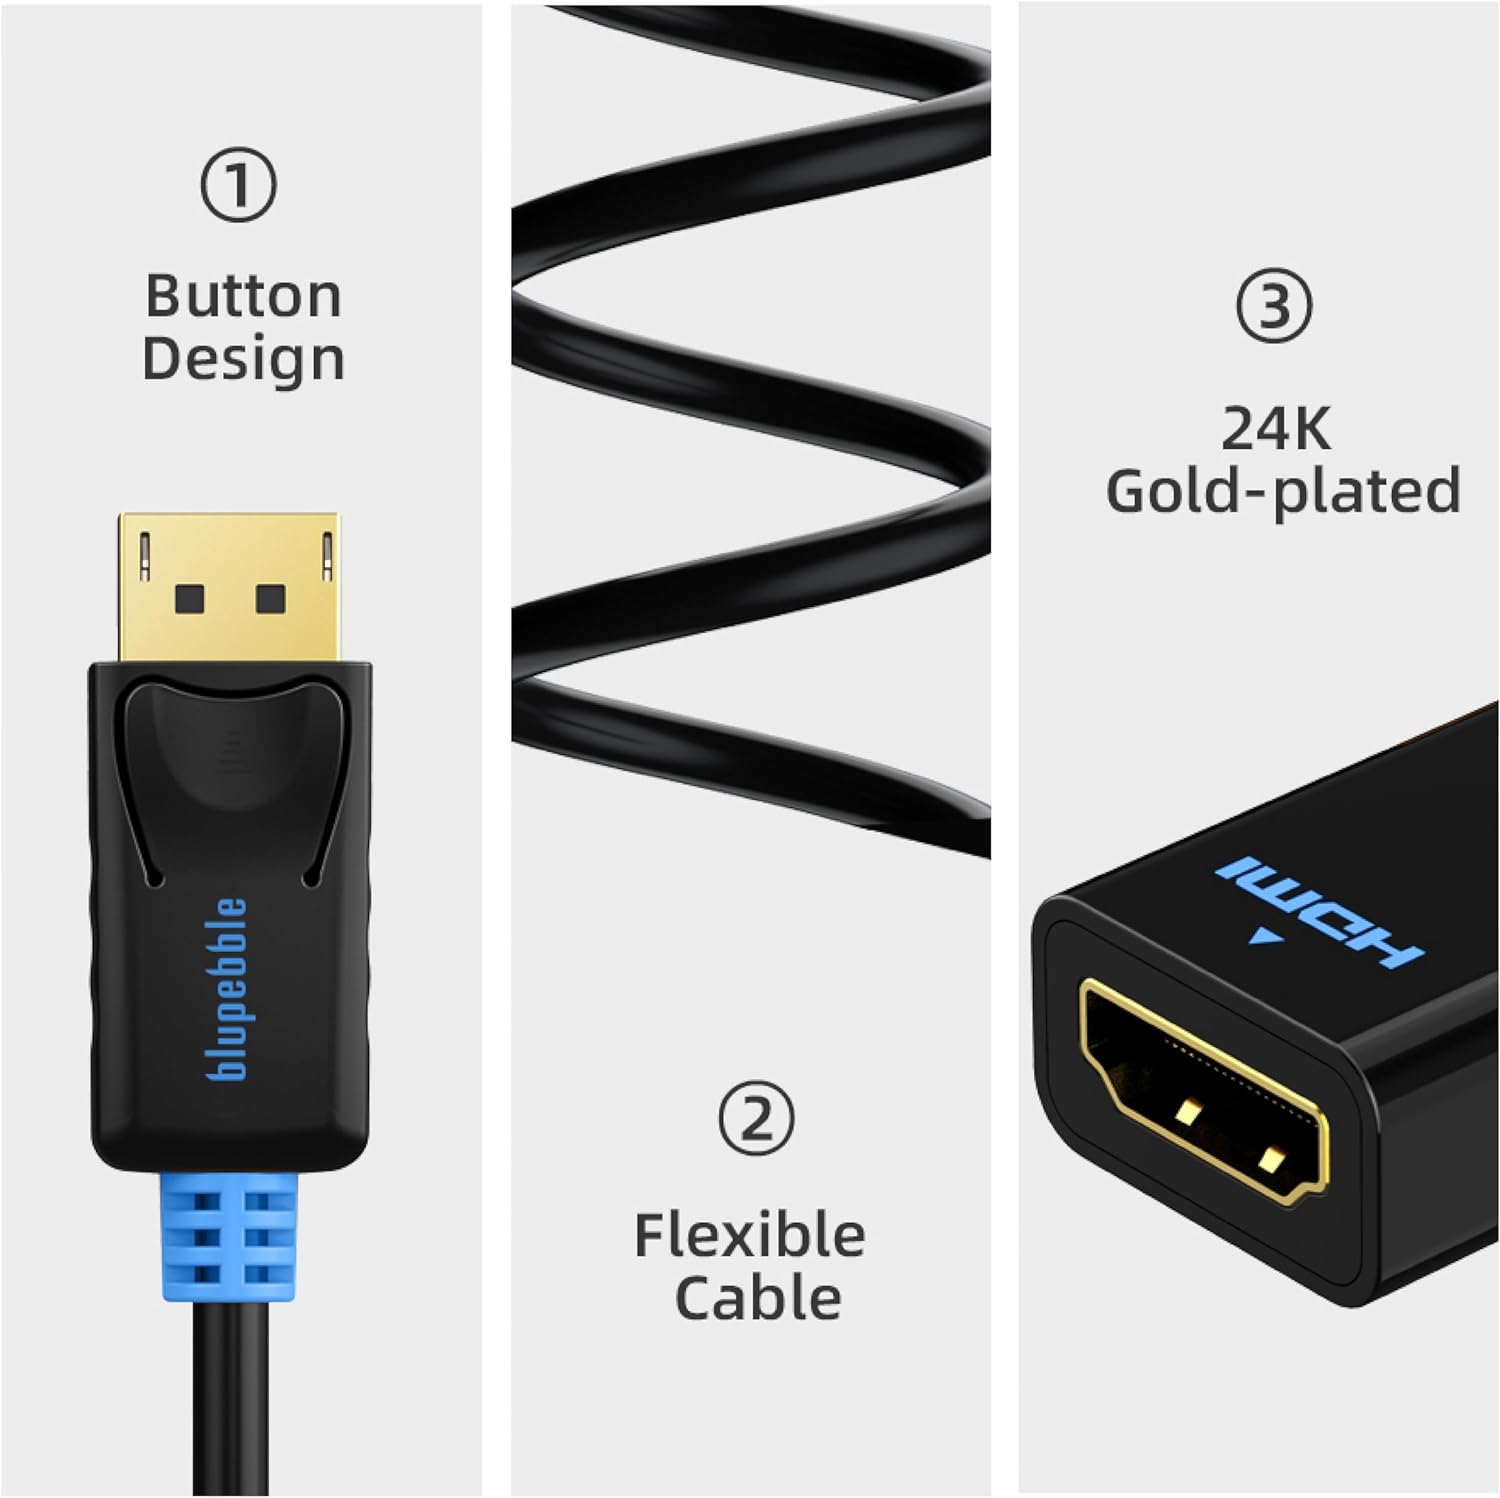 Blupebble 4K DisplayPort to HDMI Adapter 4k@30 Hz DP to HDMI Converter Male to Female Compatible with HP, ThinkPad, AMD, NVIDIA, Desktop, and More